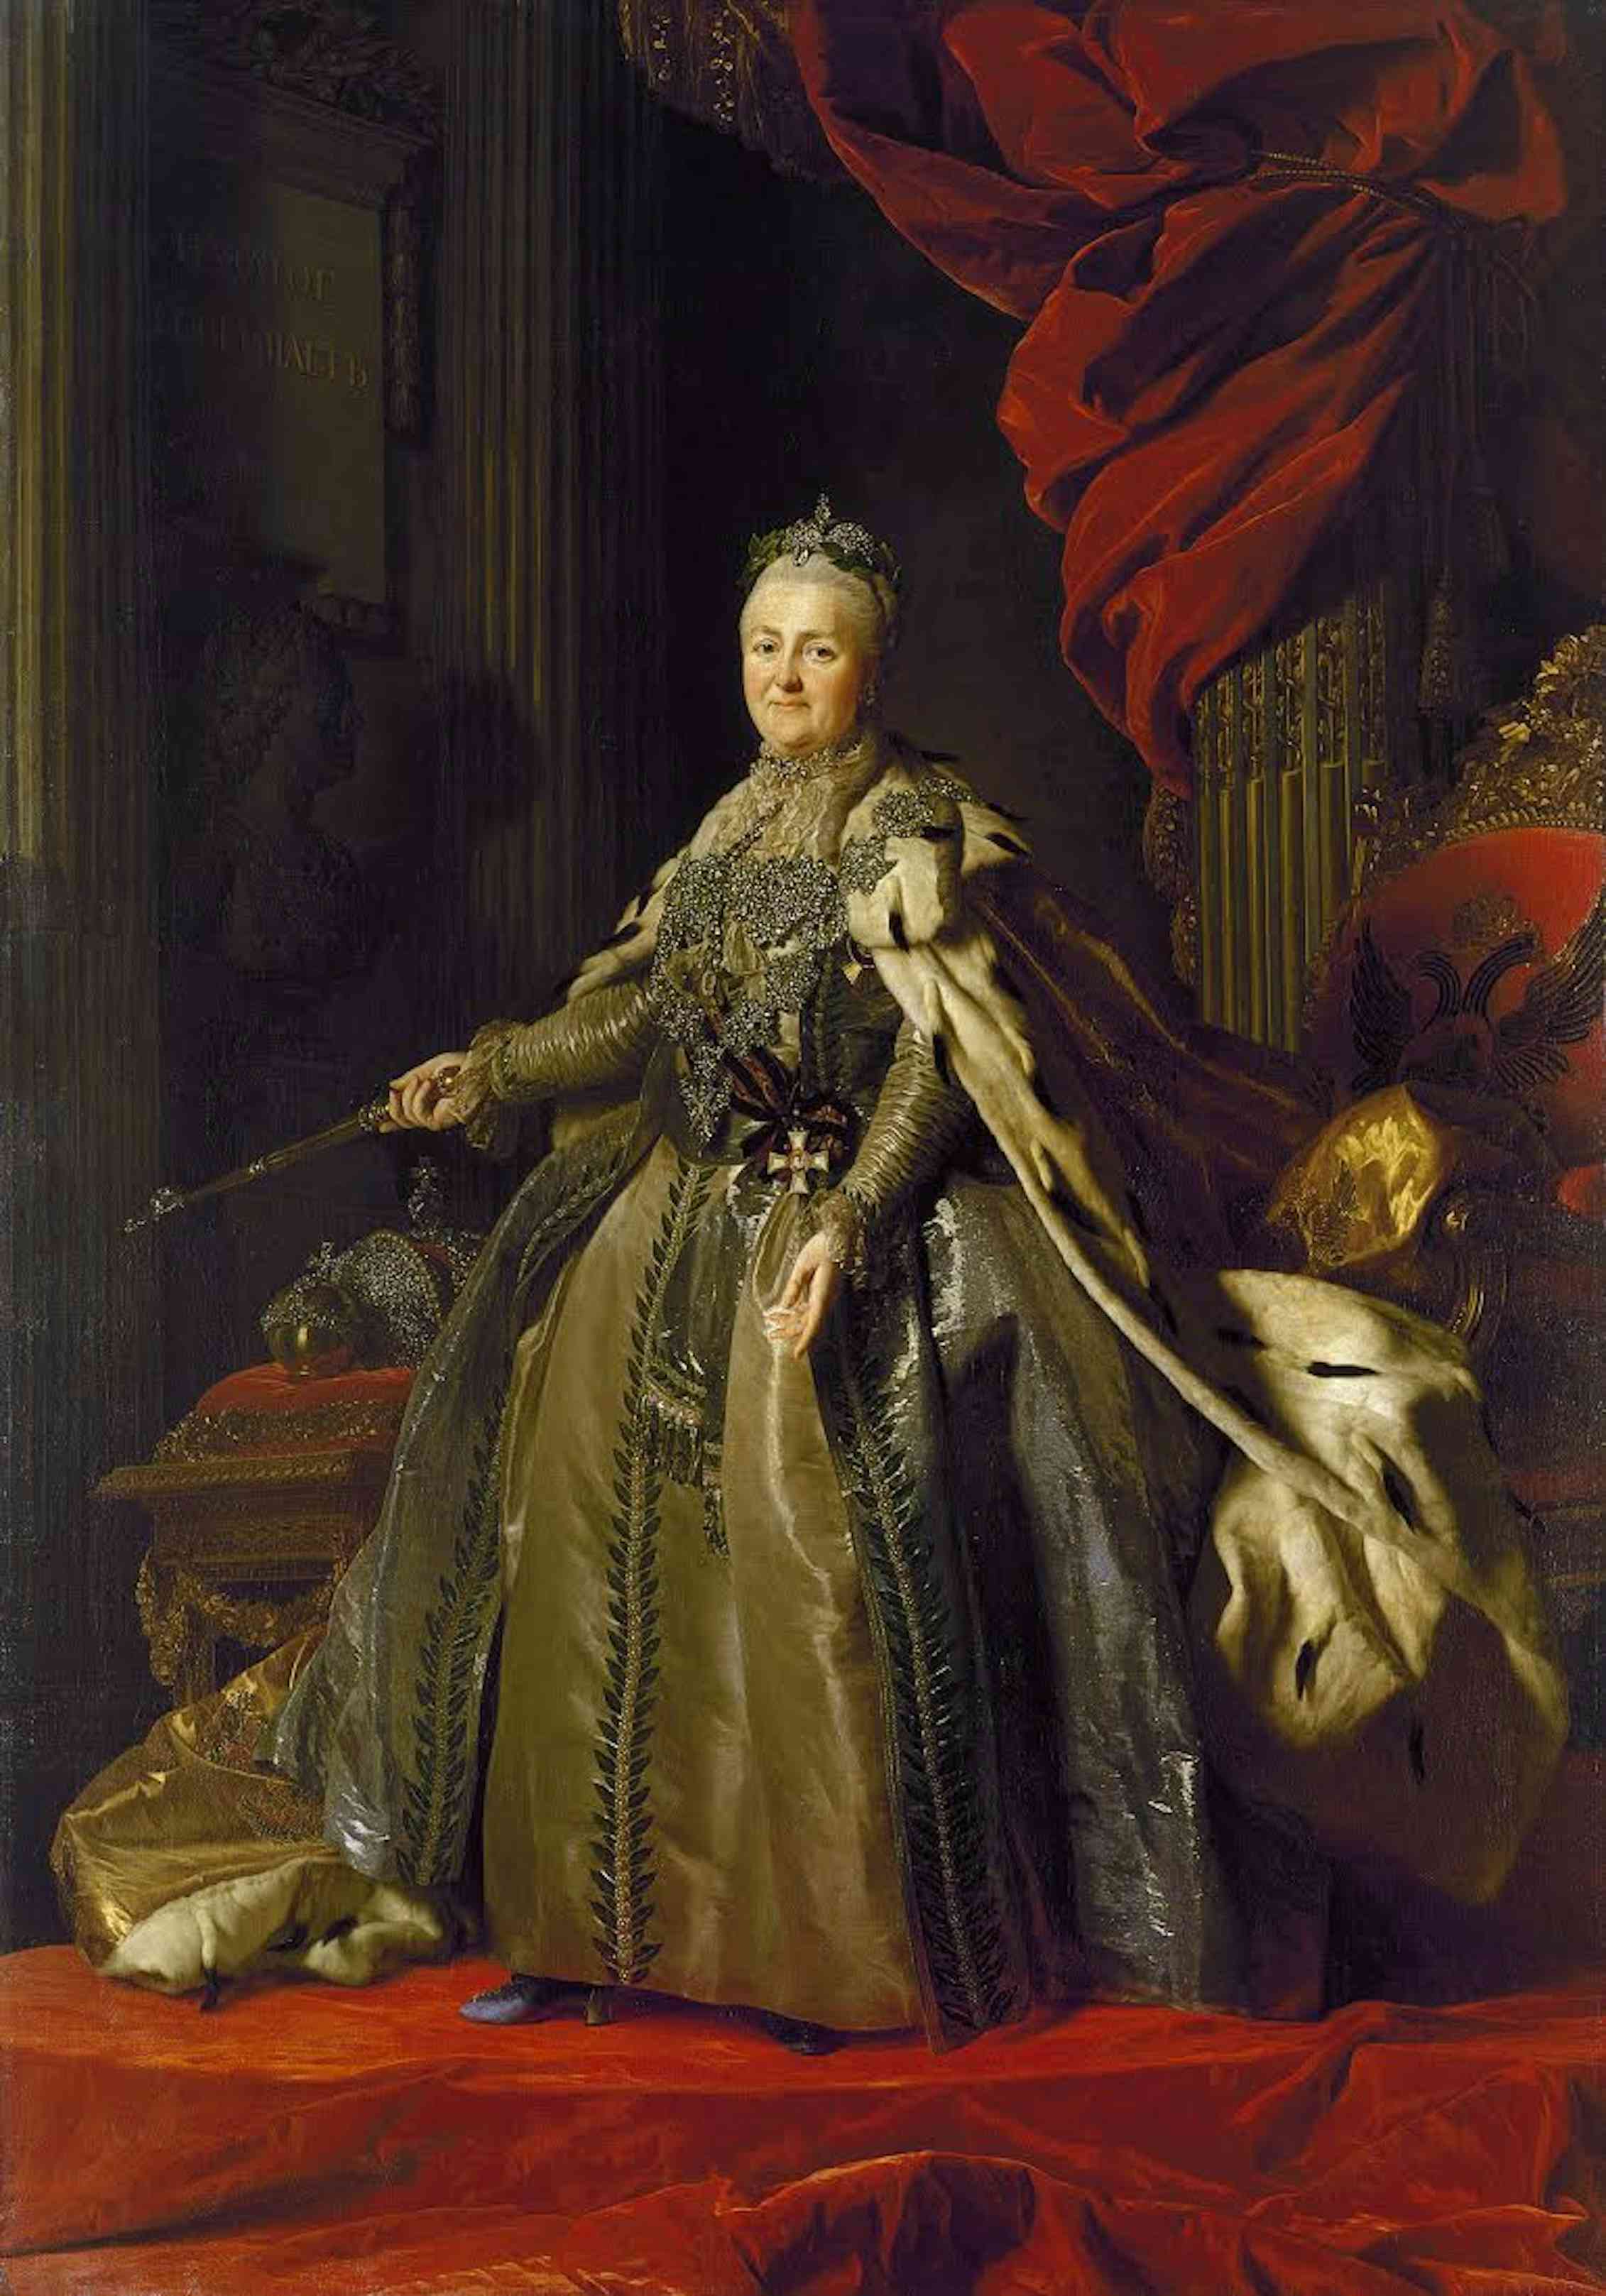 Why Catherine the Great's 'greatness' doesn't grate